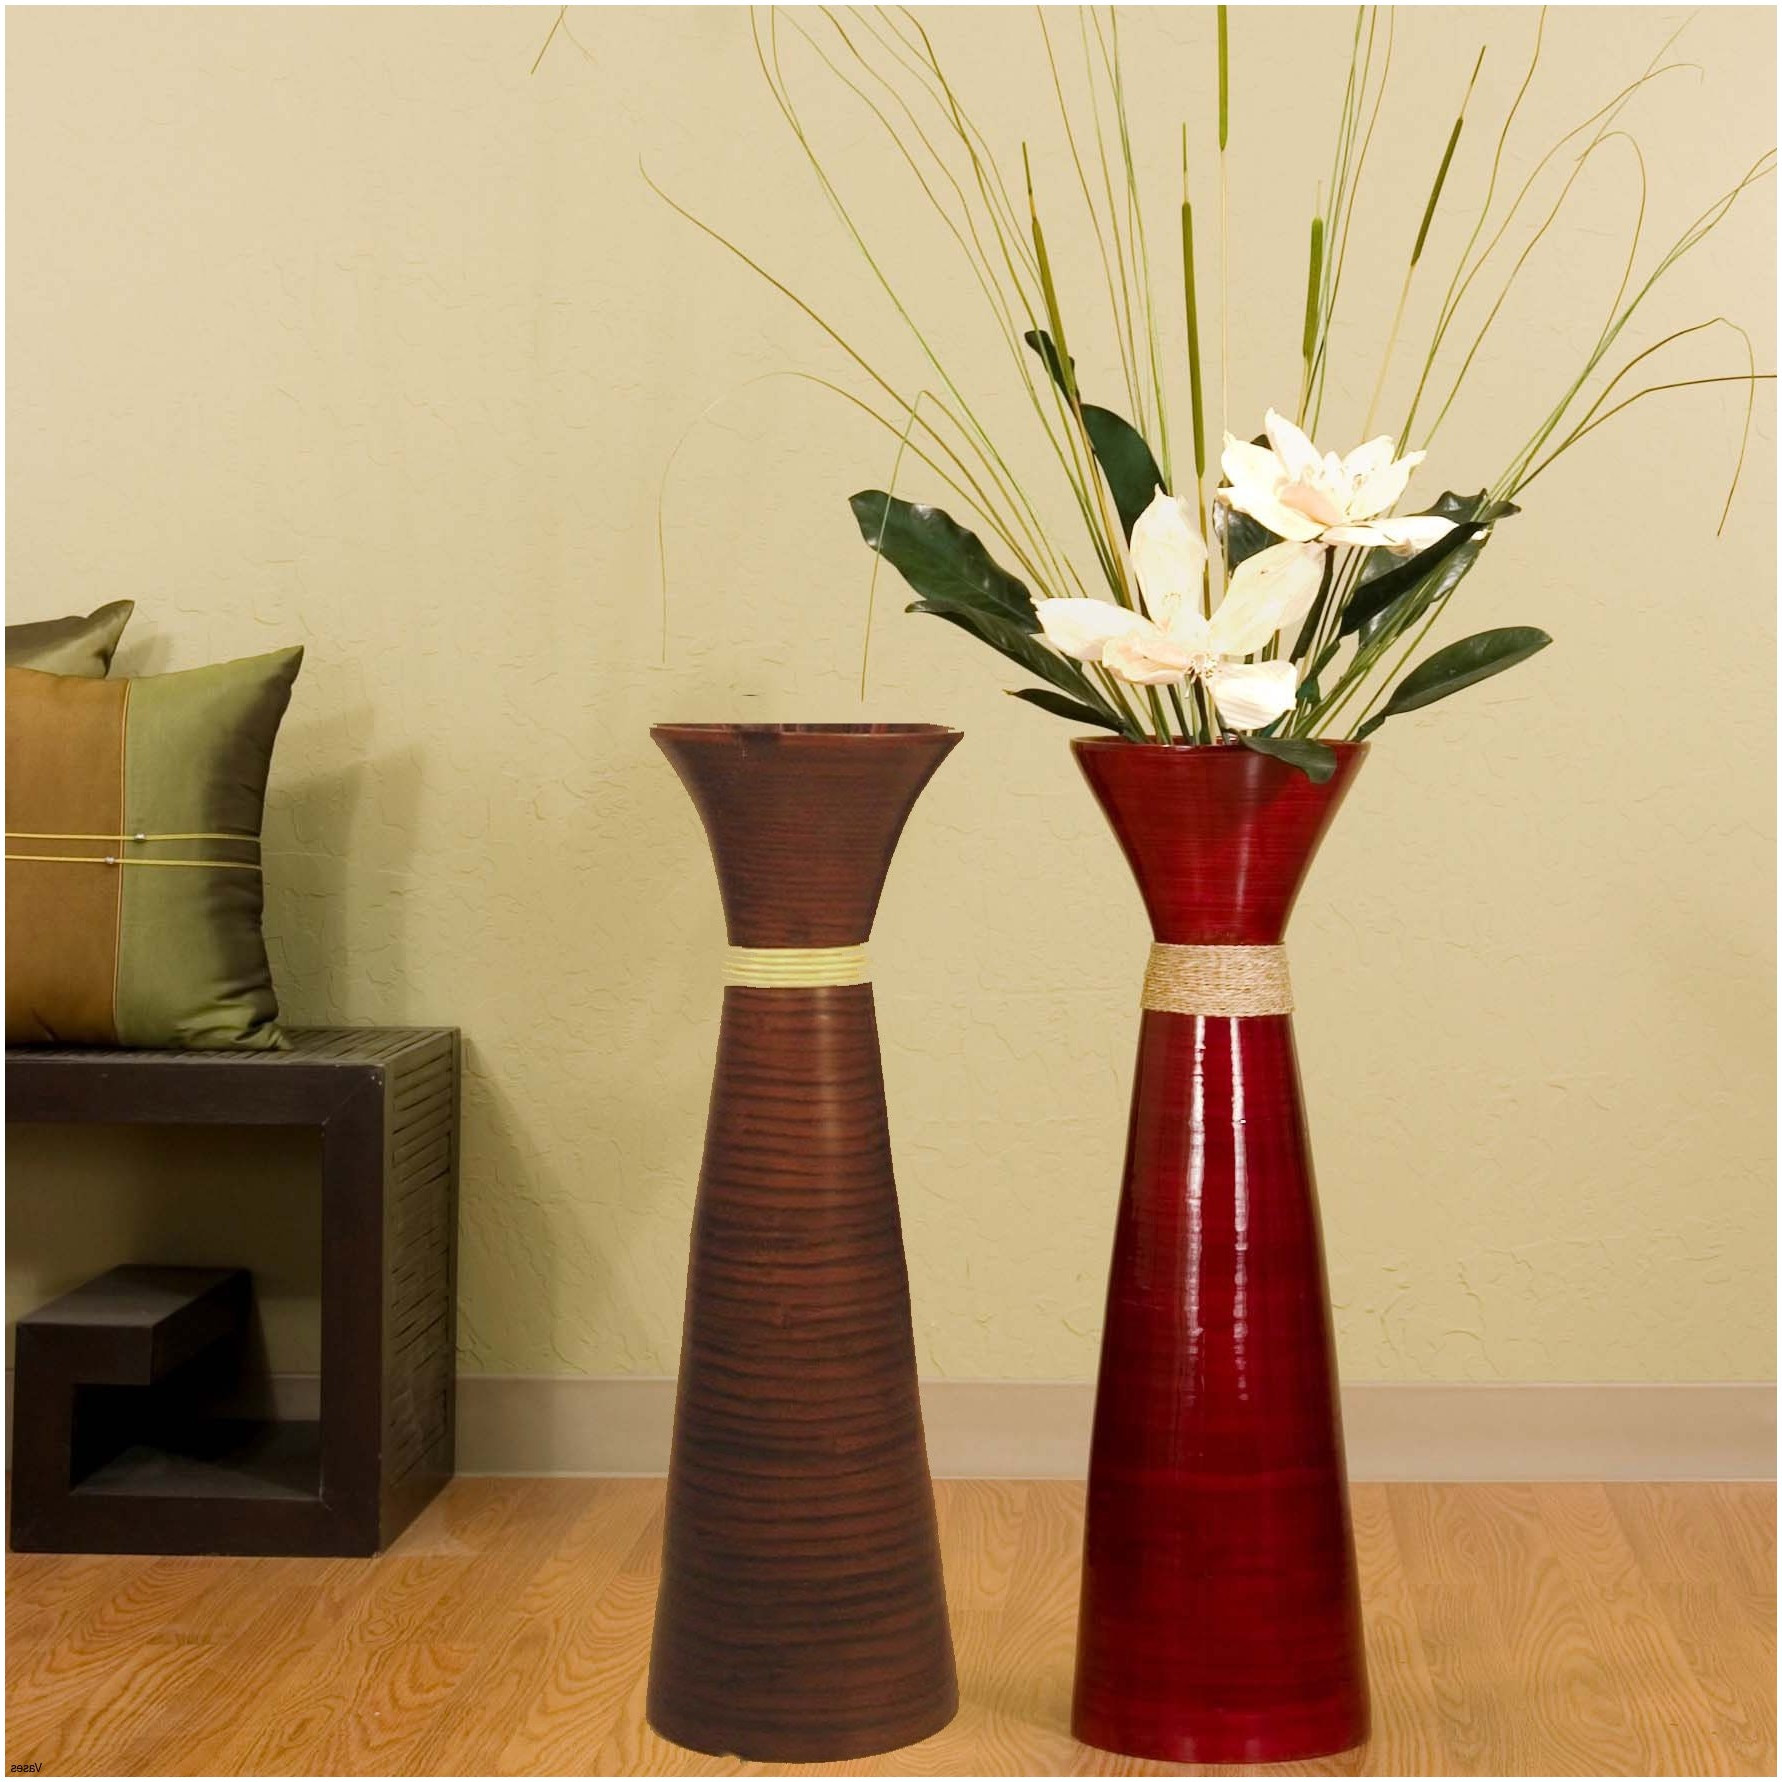 19 Recommended Extra Large Floor Standing Vase 2022 free download extra large floor standing vase of 21 beau decorative vases anciendemutu org pertaining to floor vase colorsh vases red decorative image colorsi 0d